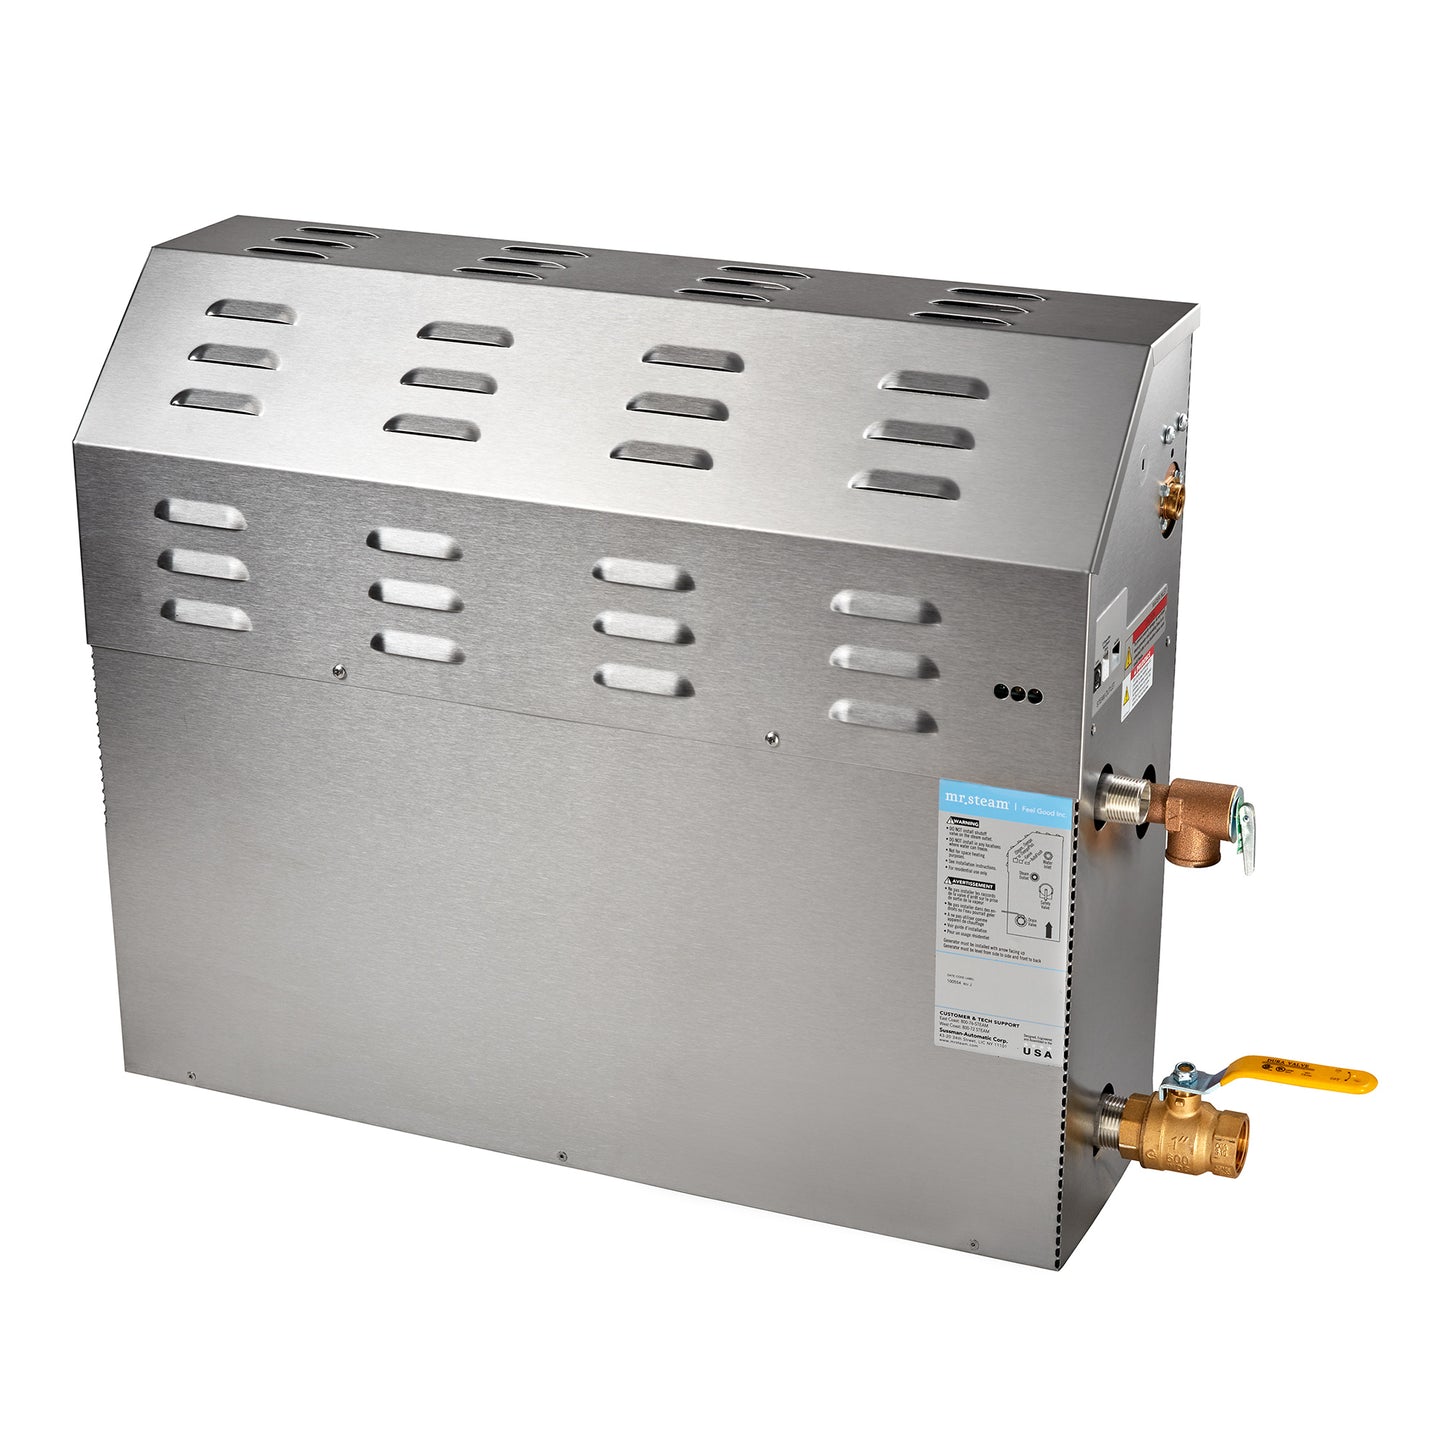 eSeries Max 30kW Express Steam Bath Generator at 240V With Express Steam